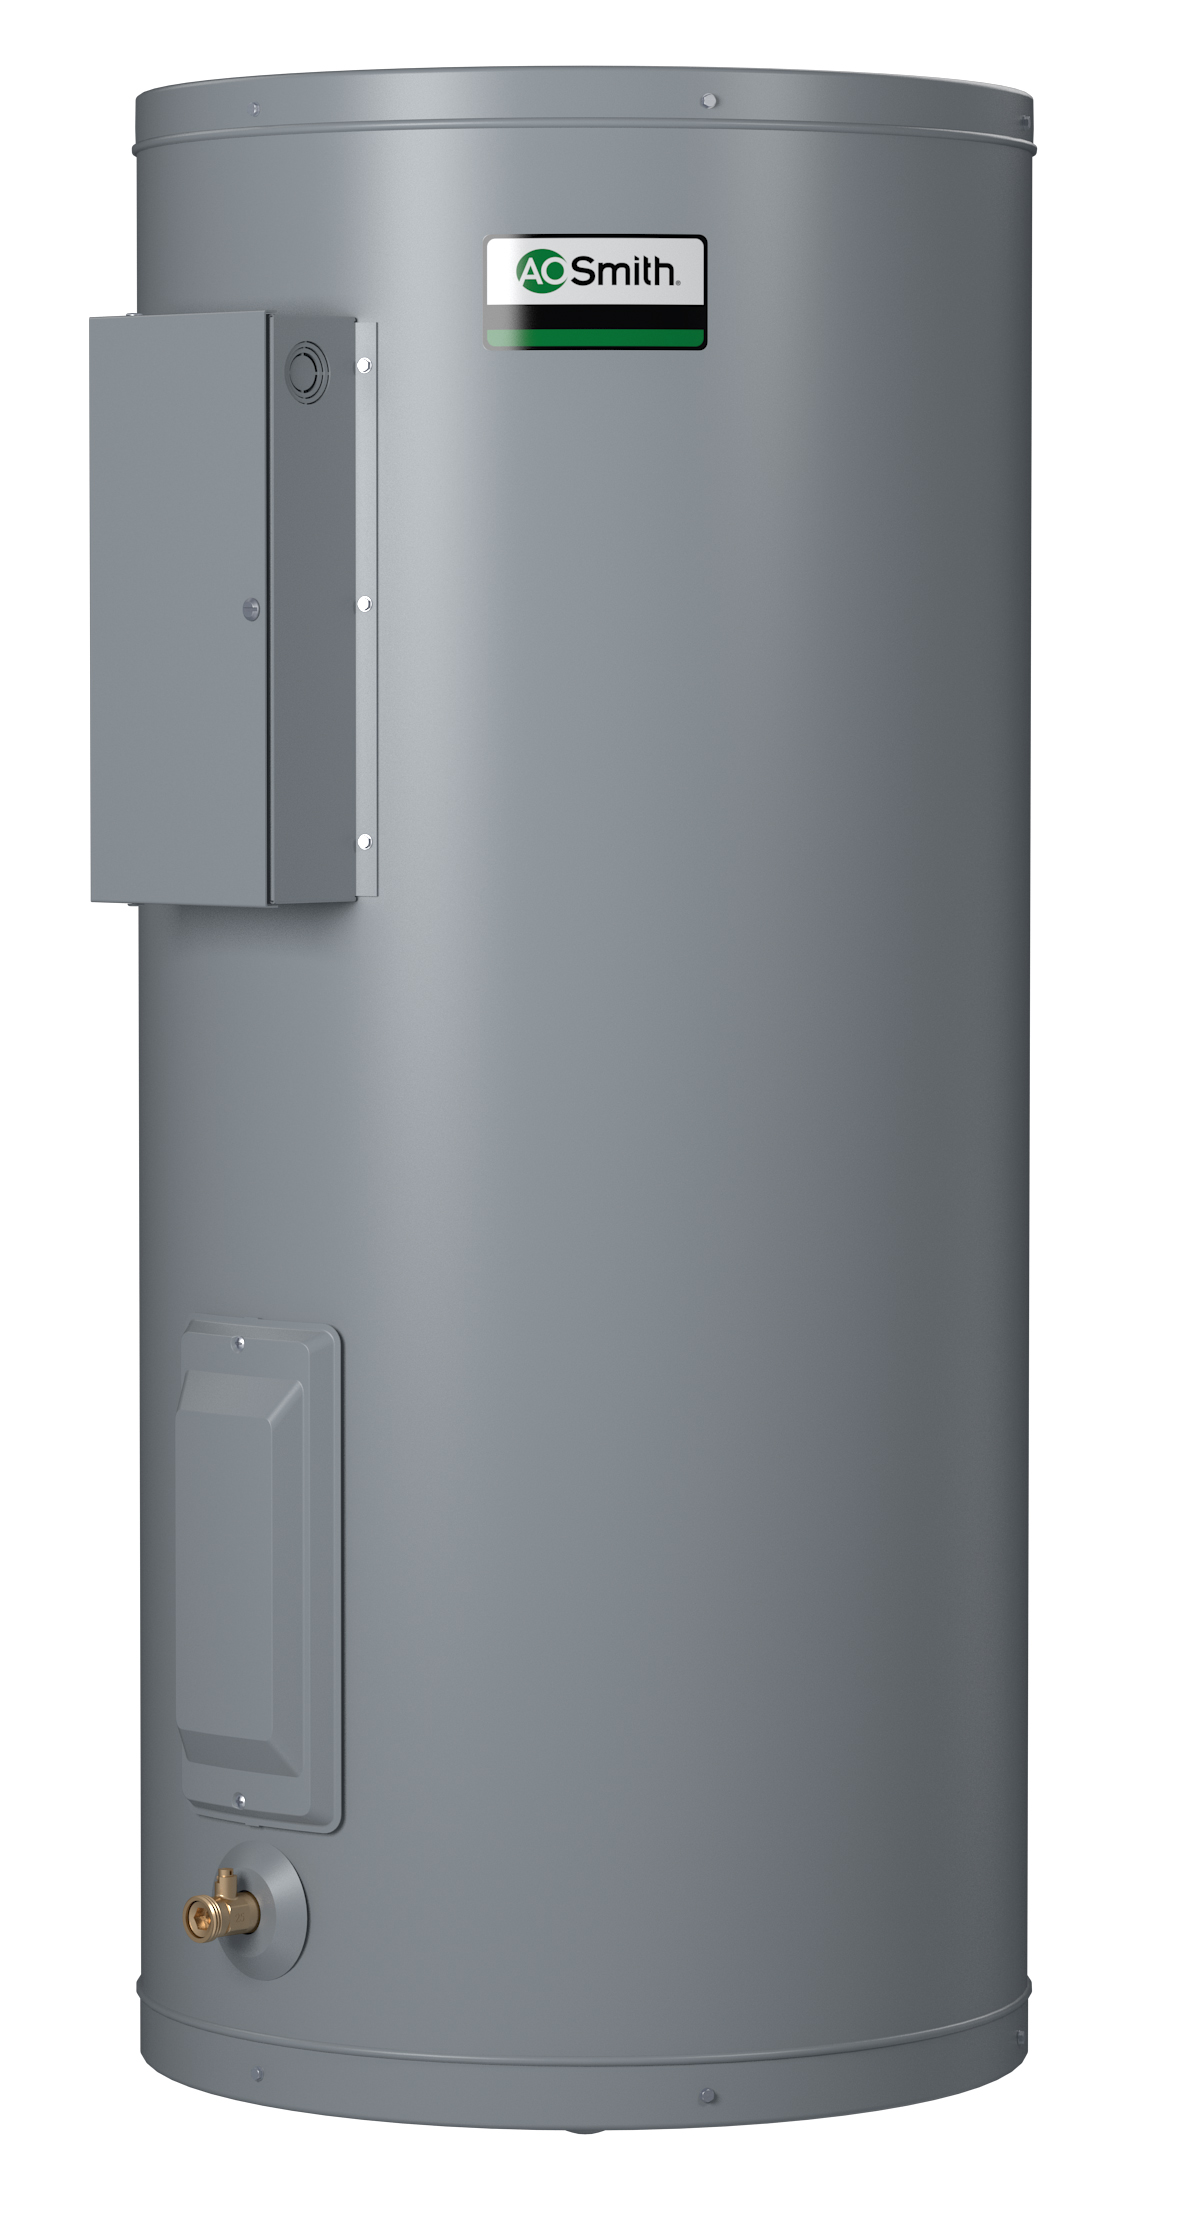 AO SMITH DEL-40D: 38 GALLONS, 8.0KW, 208 VOLT, 1 PHASE, (2-4000 WATT ELEMENTS, SIMULTANEOUS WIRING), DURA-POWER, LIGHT DUTY COMMERCIAL ELECTRIC WATER HEATER